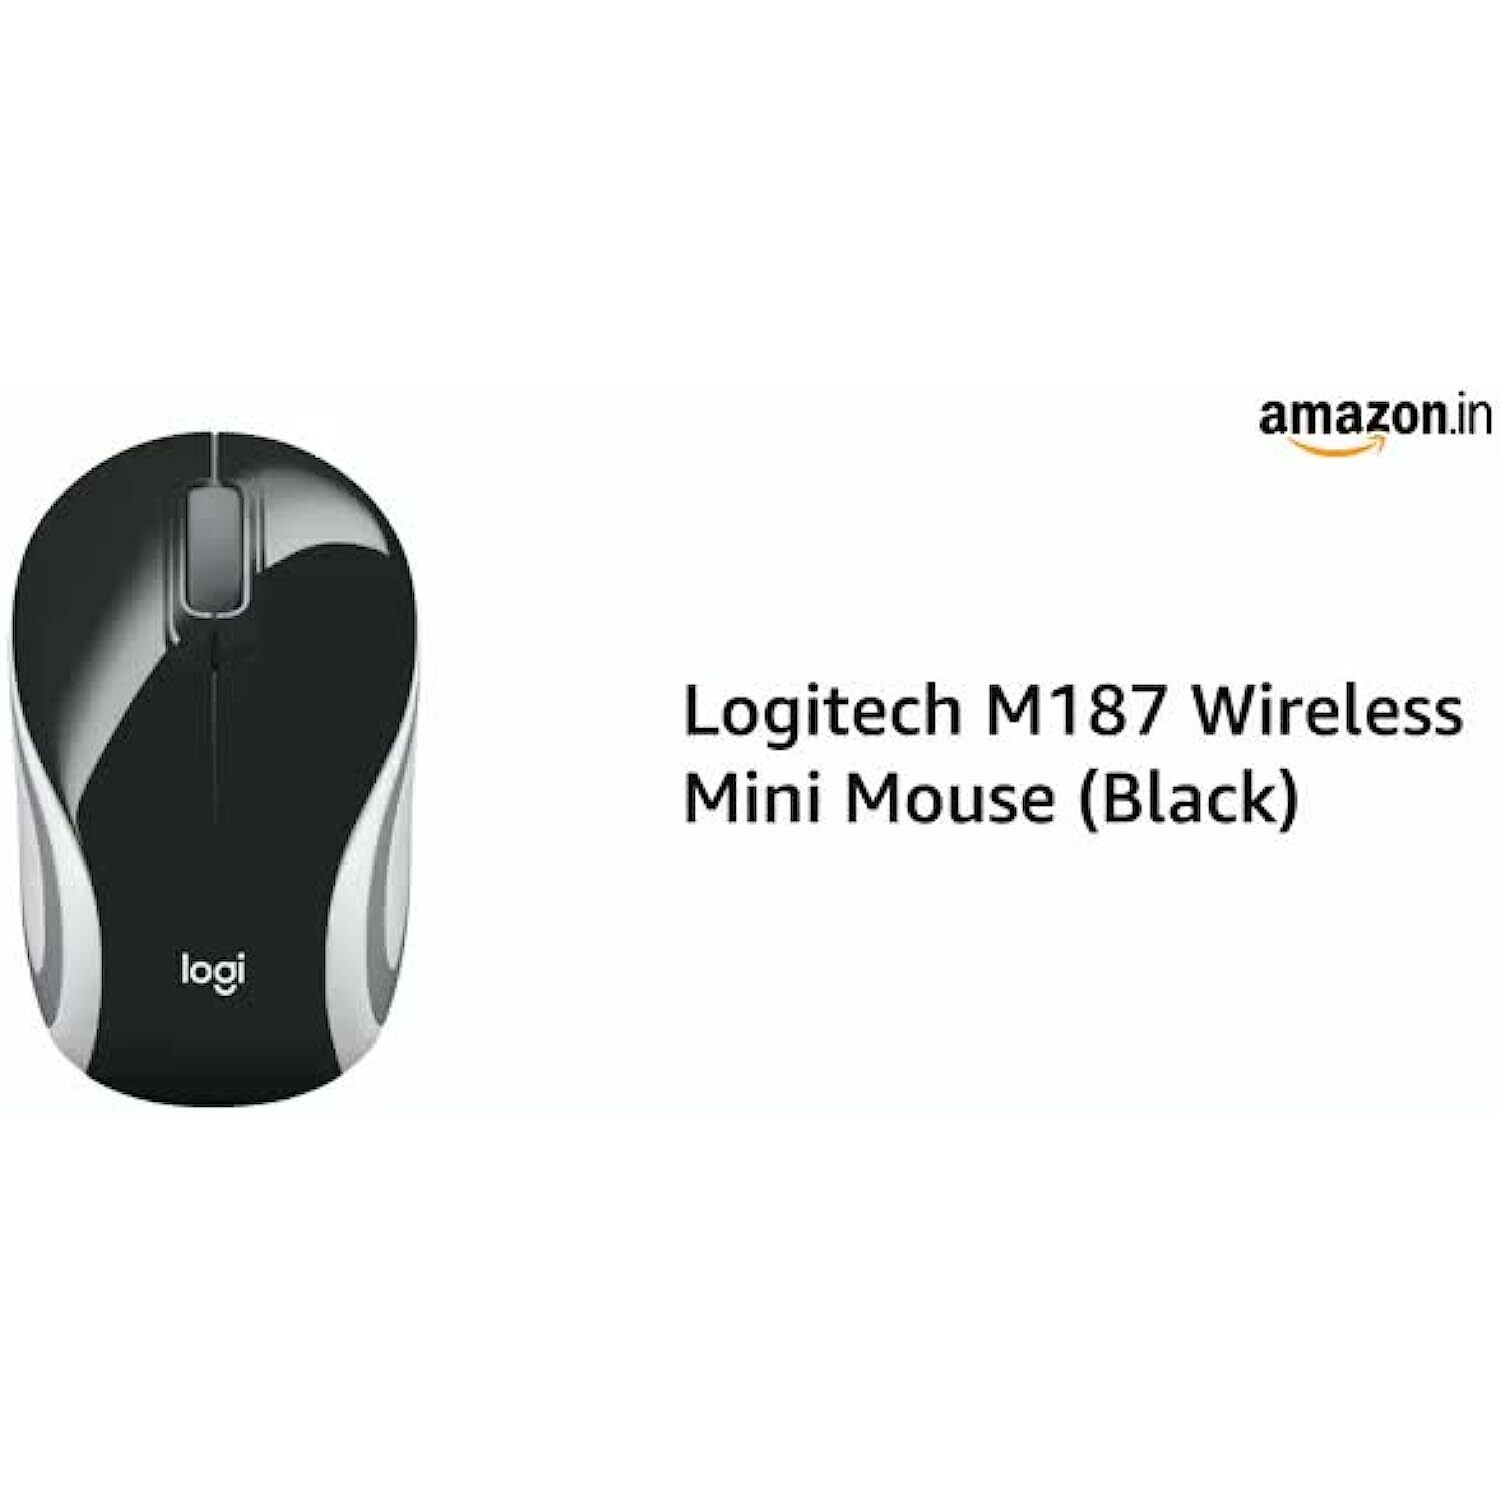 Logitech M187 Ultra Portable Wireless Mouse, 2.4 GHz with USB Receiver, 1000 DPI Optical Tracking, 3-Buttons, PC/Mac/Laptop - Black